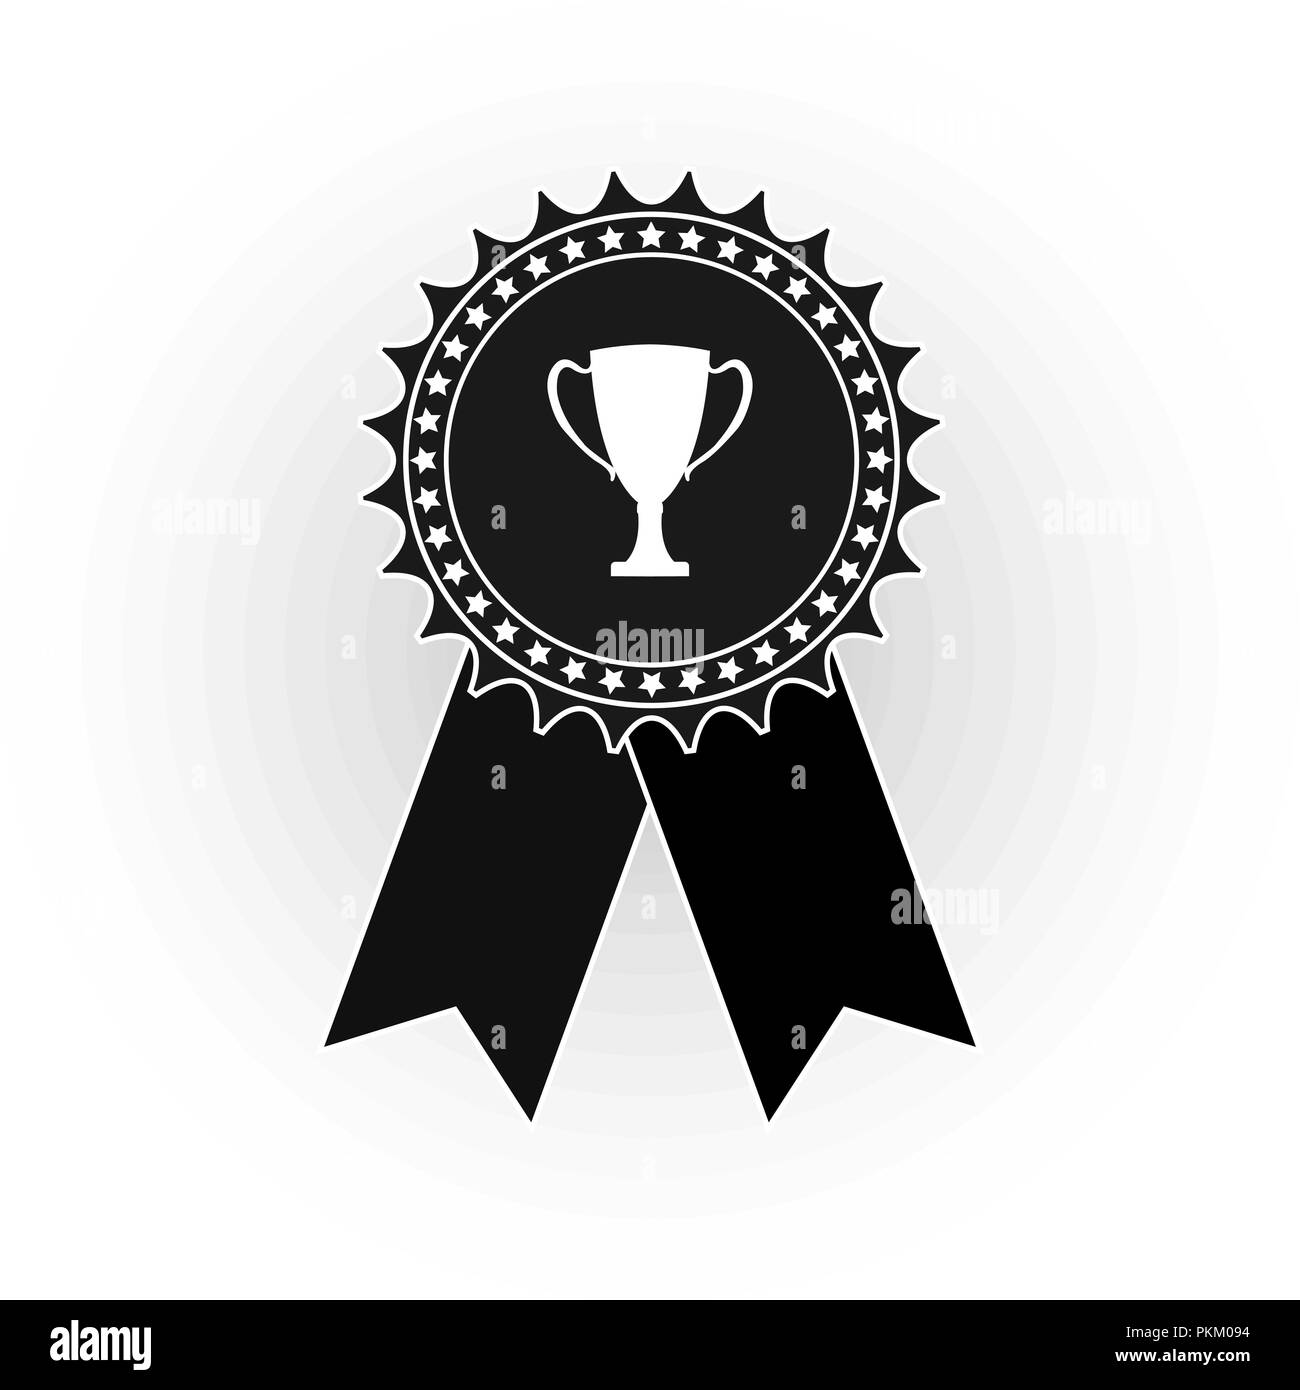 Icon medal with the image of the Cup, flat black and white image Stock Vector